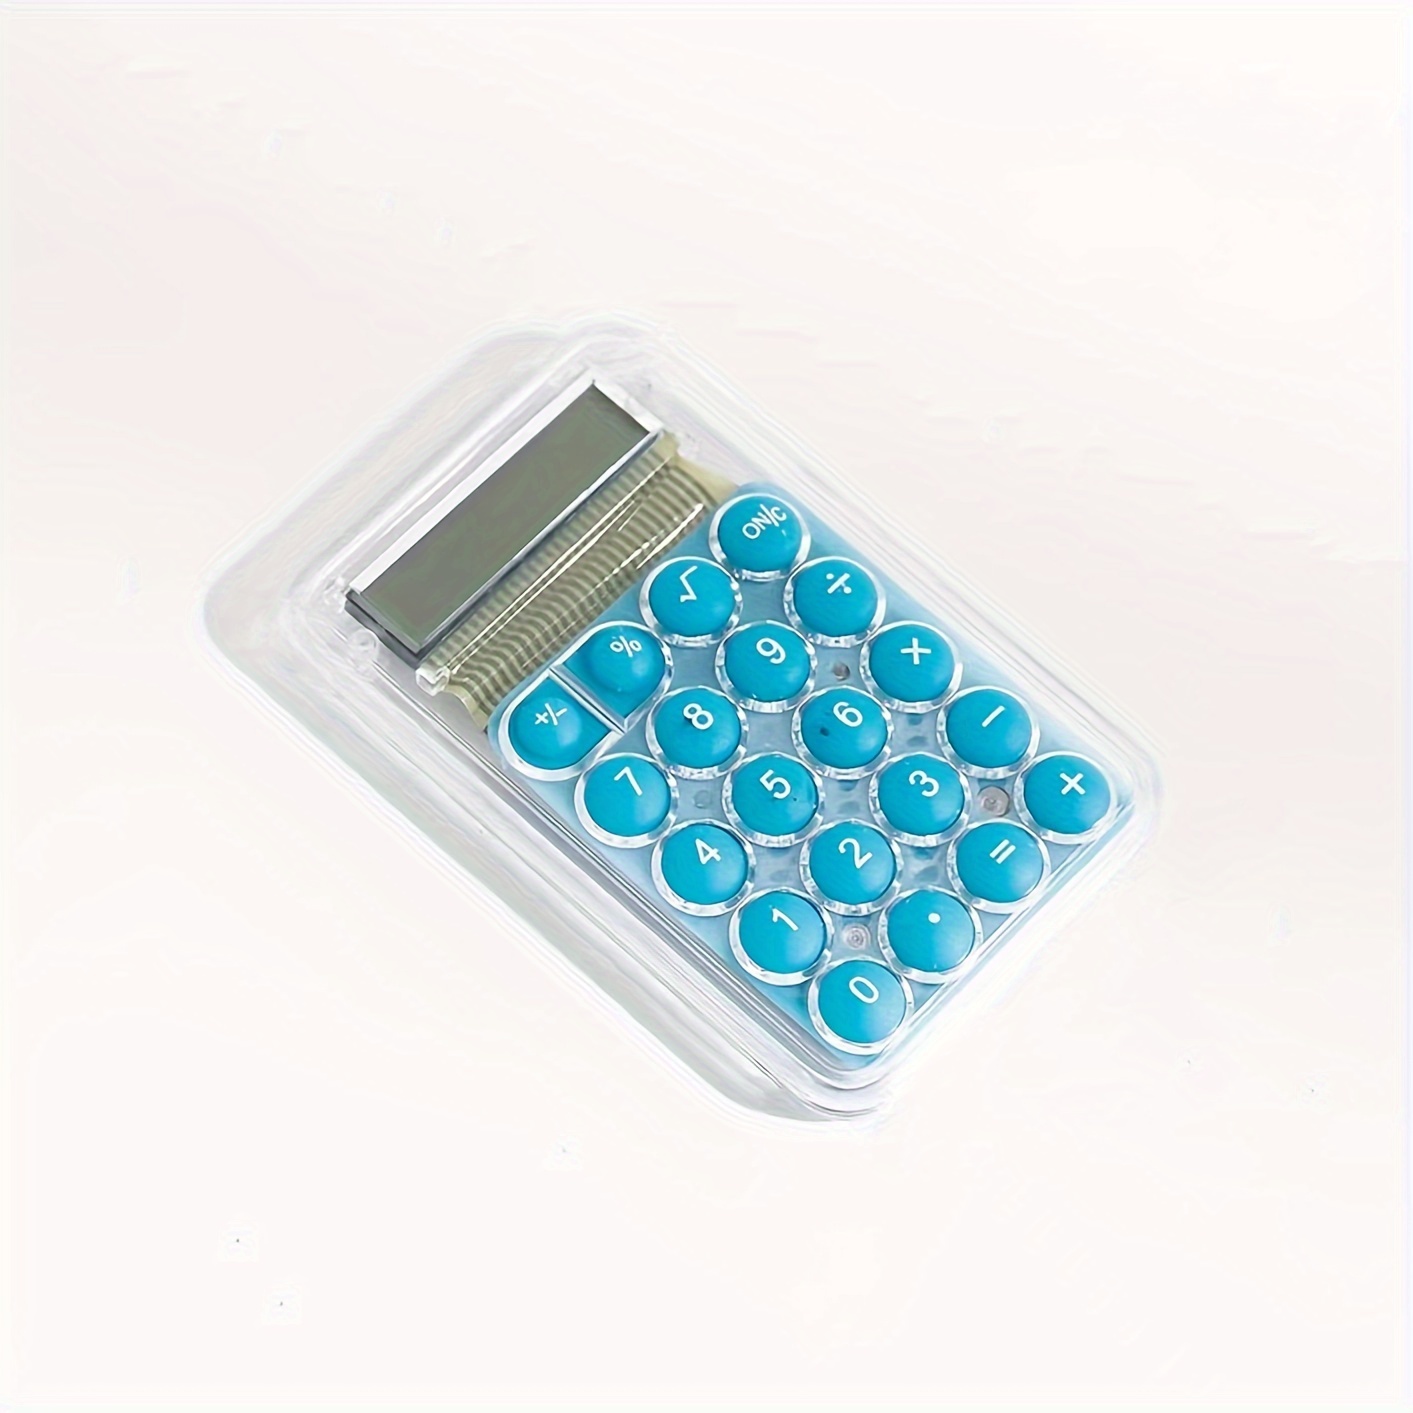 cute mini large display high appearance value portable 8 digit electronic calculator small arithmetic